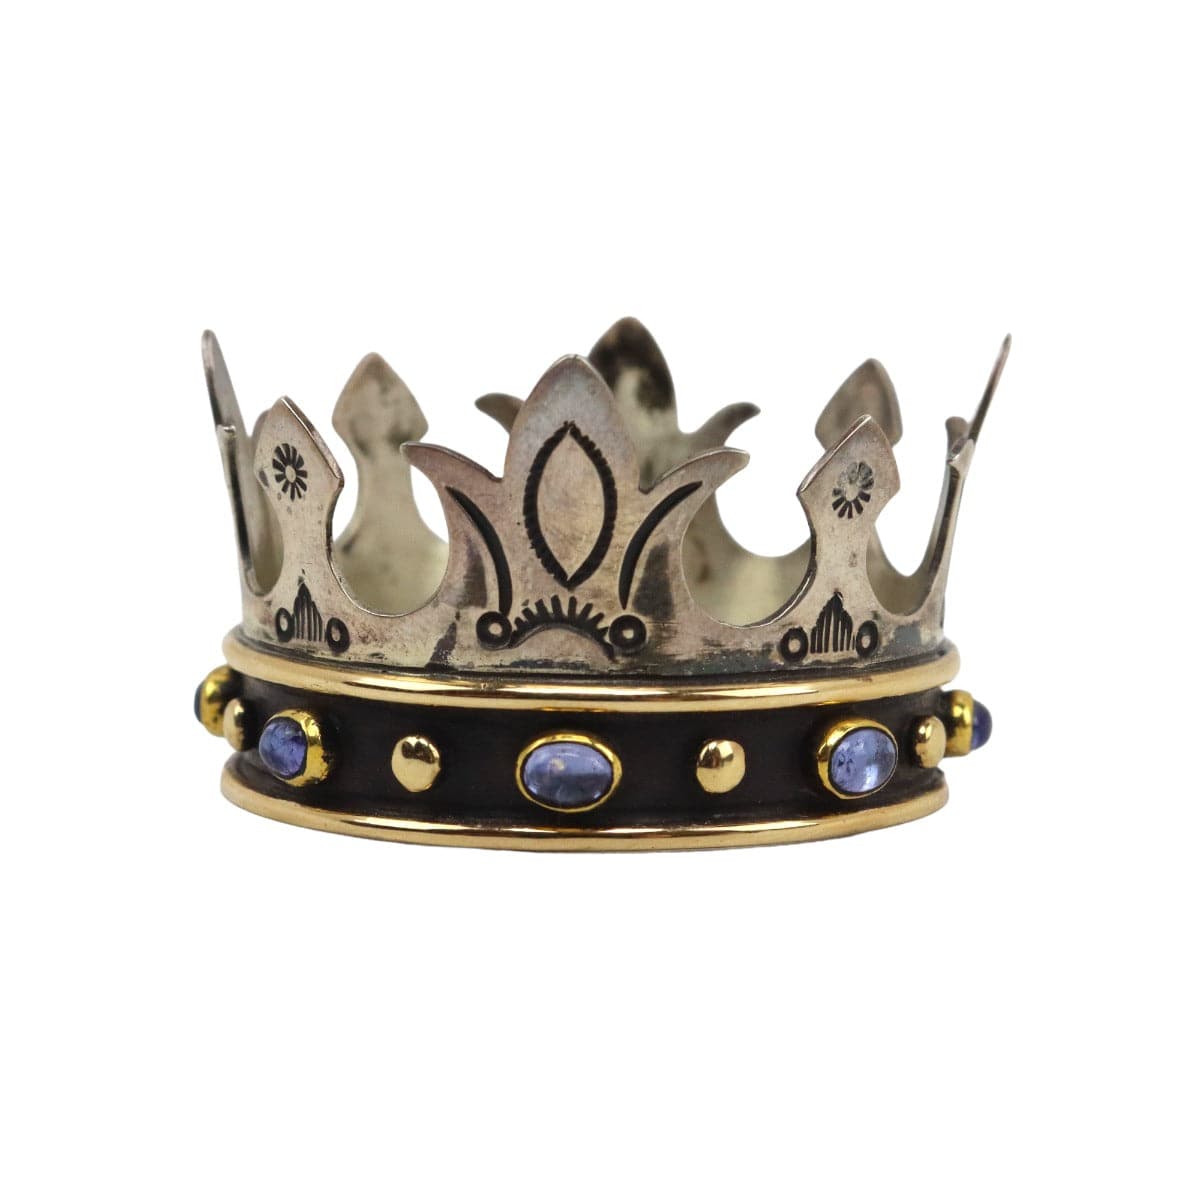 Frank Patania Jr. - Amethyst, 14K Gold, and Silver Crown, 1.25" x 1.5" (J91699-1222-031)
 1